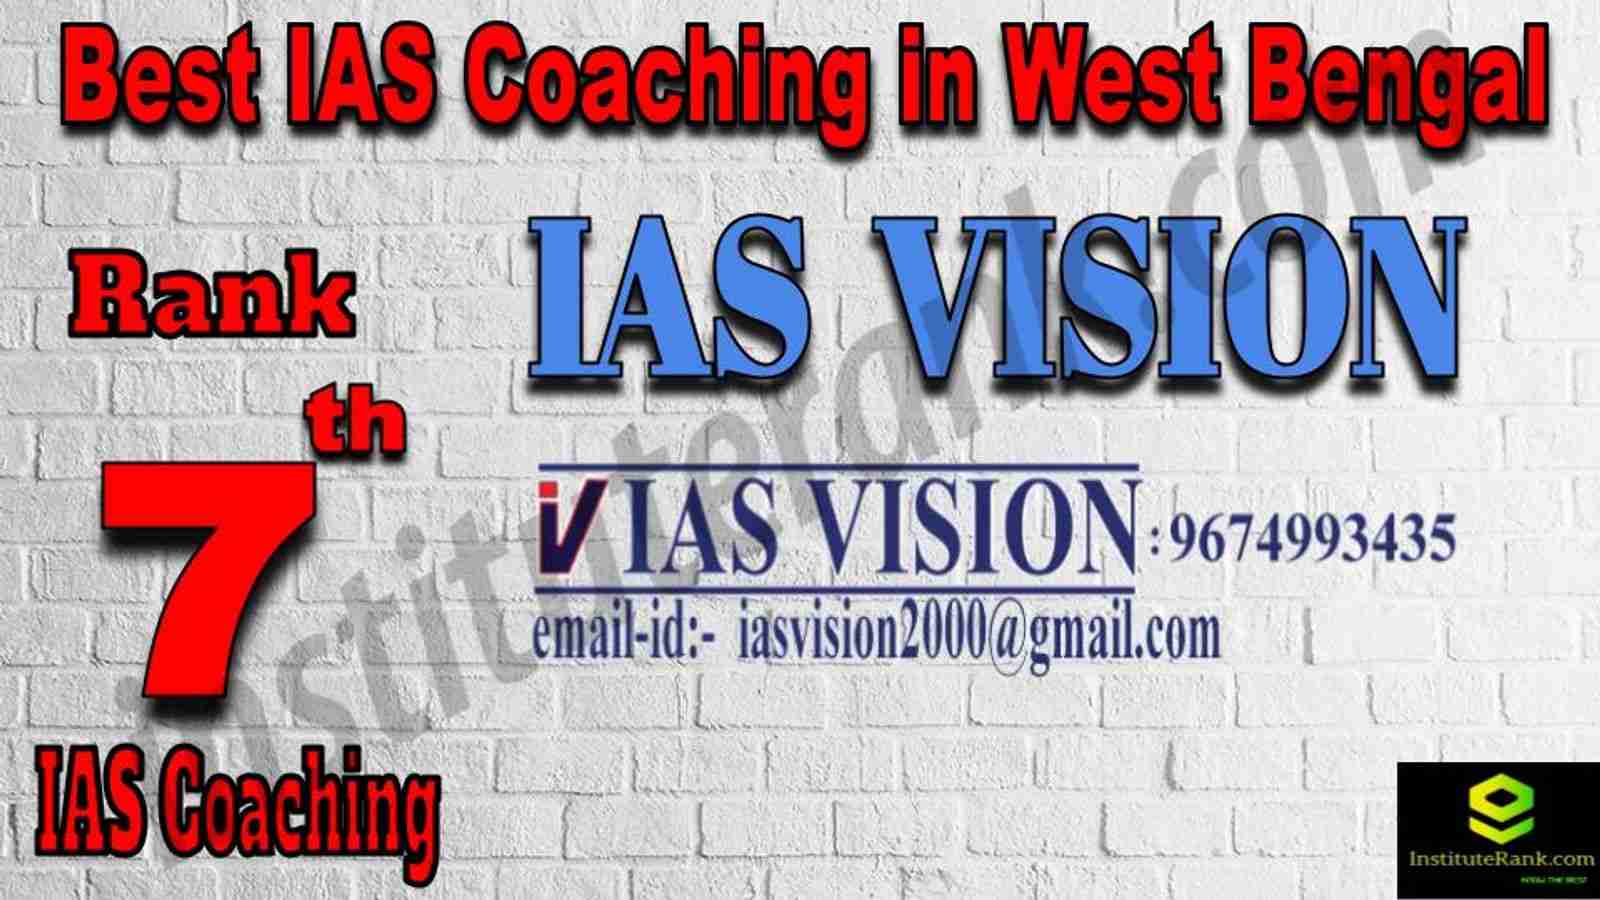 7th Best IAS Coaching in West Bengal